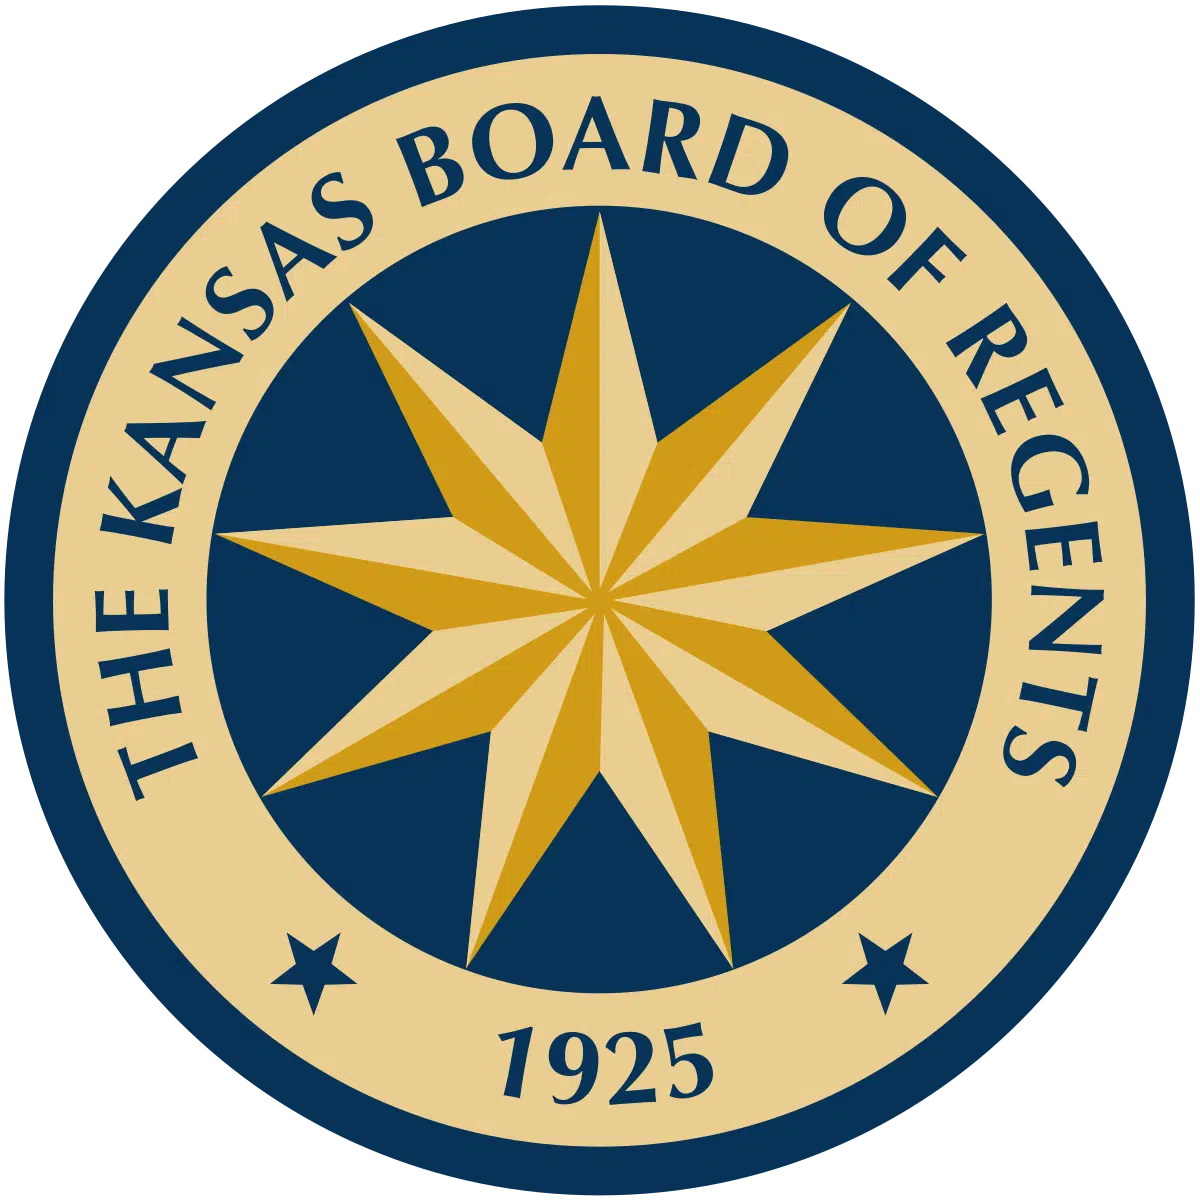 Kansas Board of Regents announces system-wide review of academic programs, resources